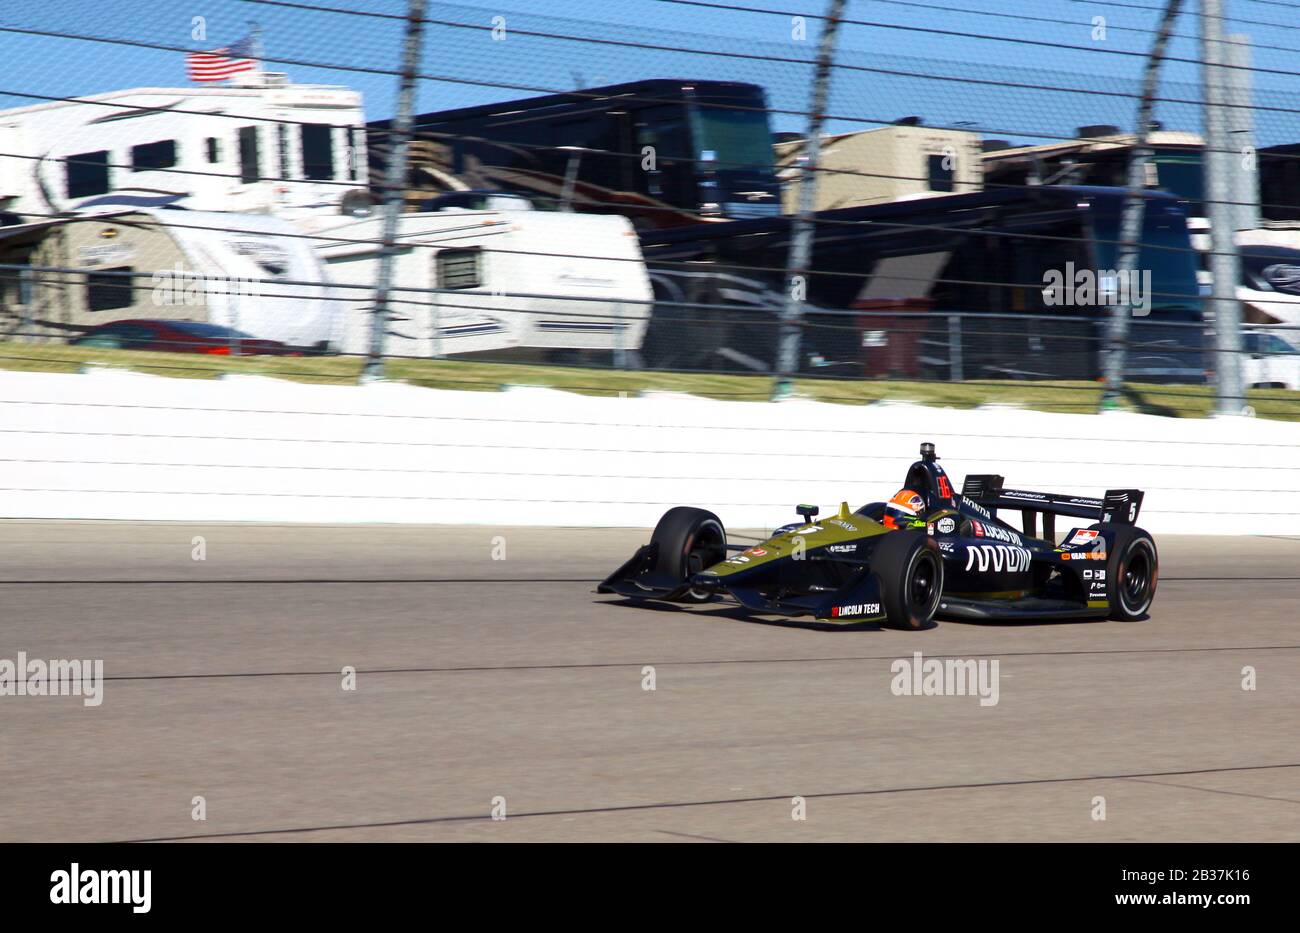 Newton Iowa, July 19, 2019: 5  James Hinchcliffe, Arrow McLaren SP, on race track during practice session for the Iowa 300 Indycar race. Stock Photo